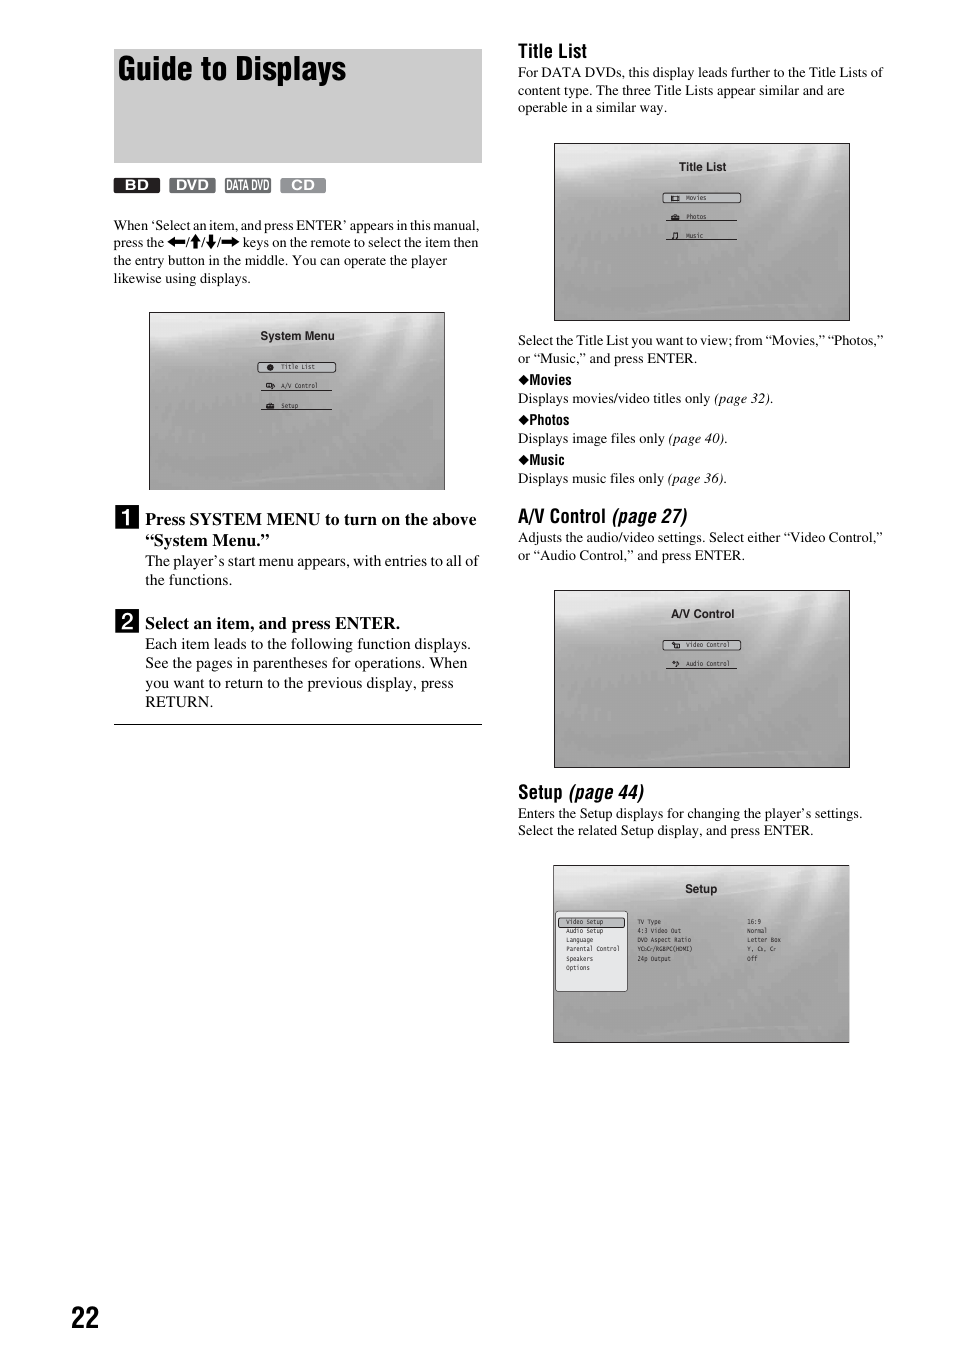 Guide to displays, Title list, A/v control (page 27) | Setup (page 44), Select an item, and press enter | Sony BDP-S2000ES User Manual | Page 22 / 71